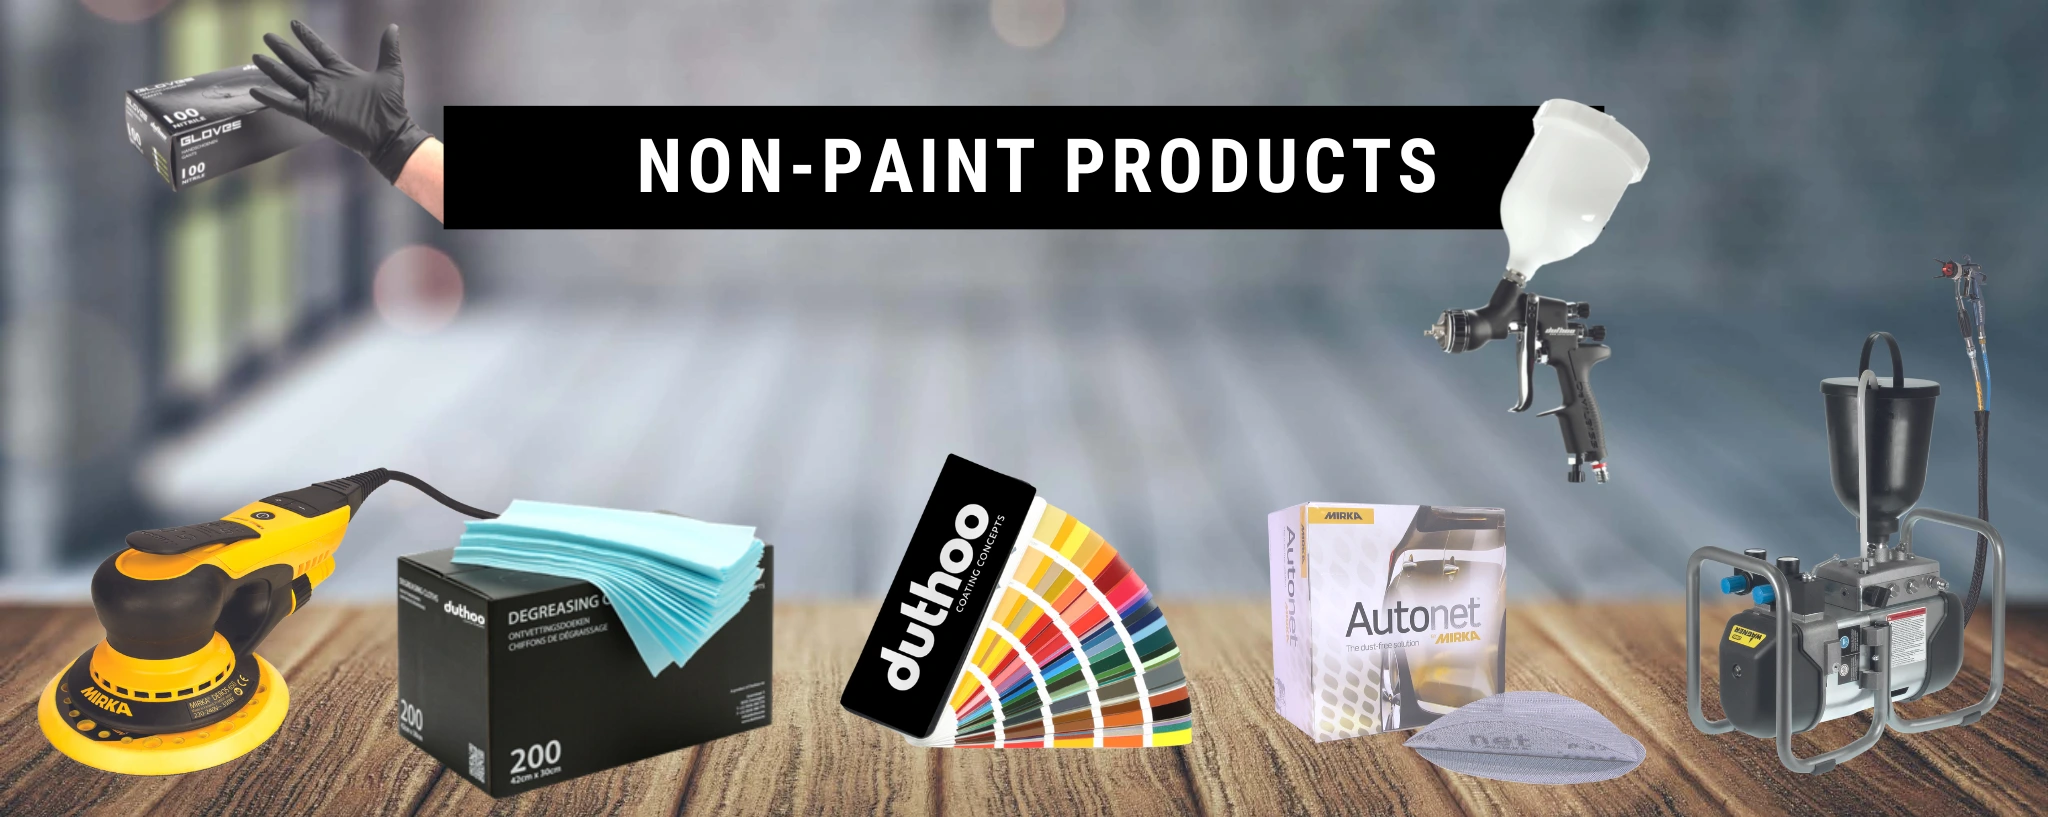 Non-paint products